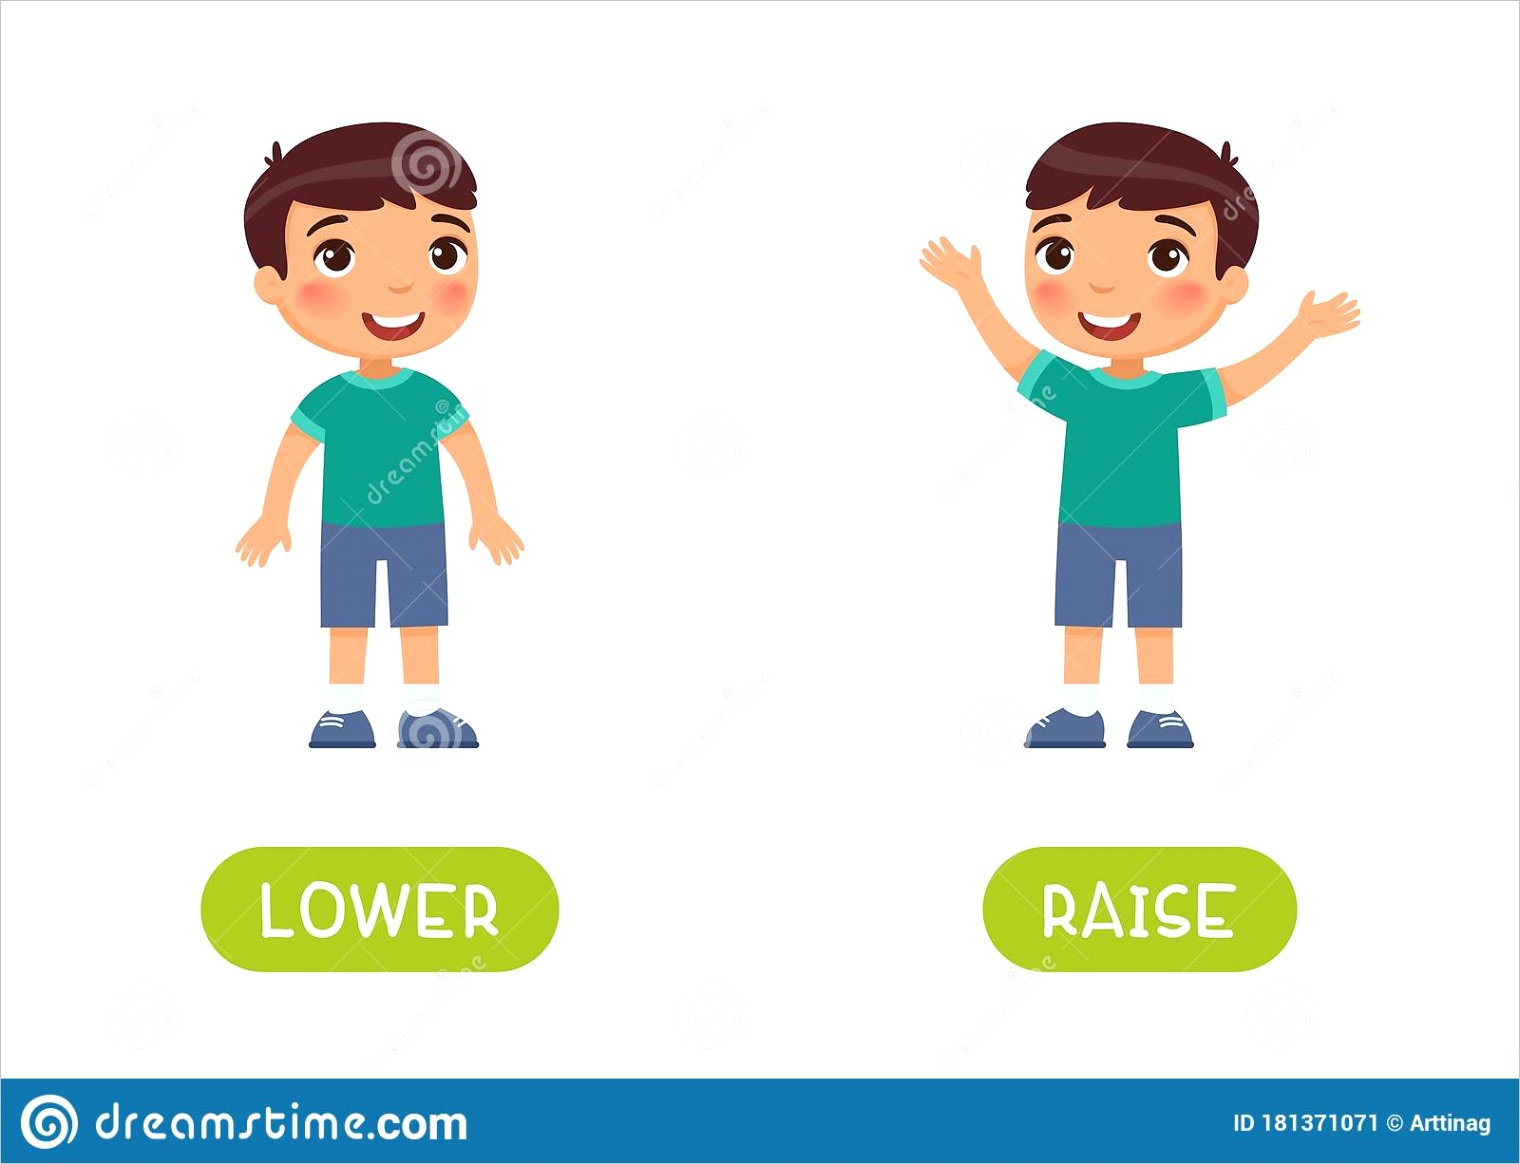 raise lower antonyms flashcard vector template word card english language learning flat characters raise lower image